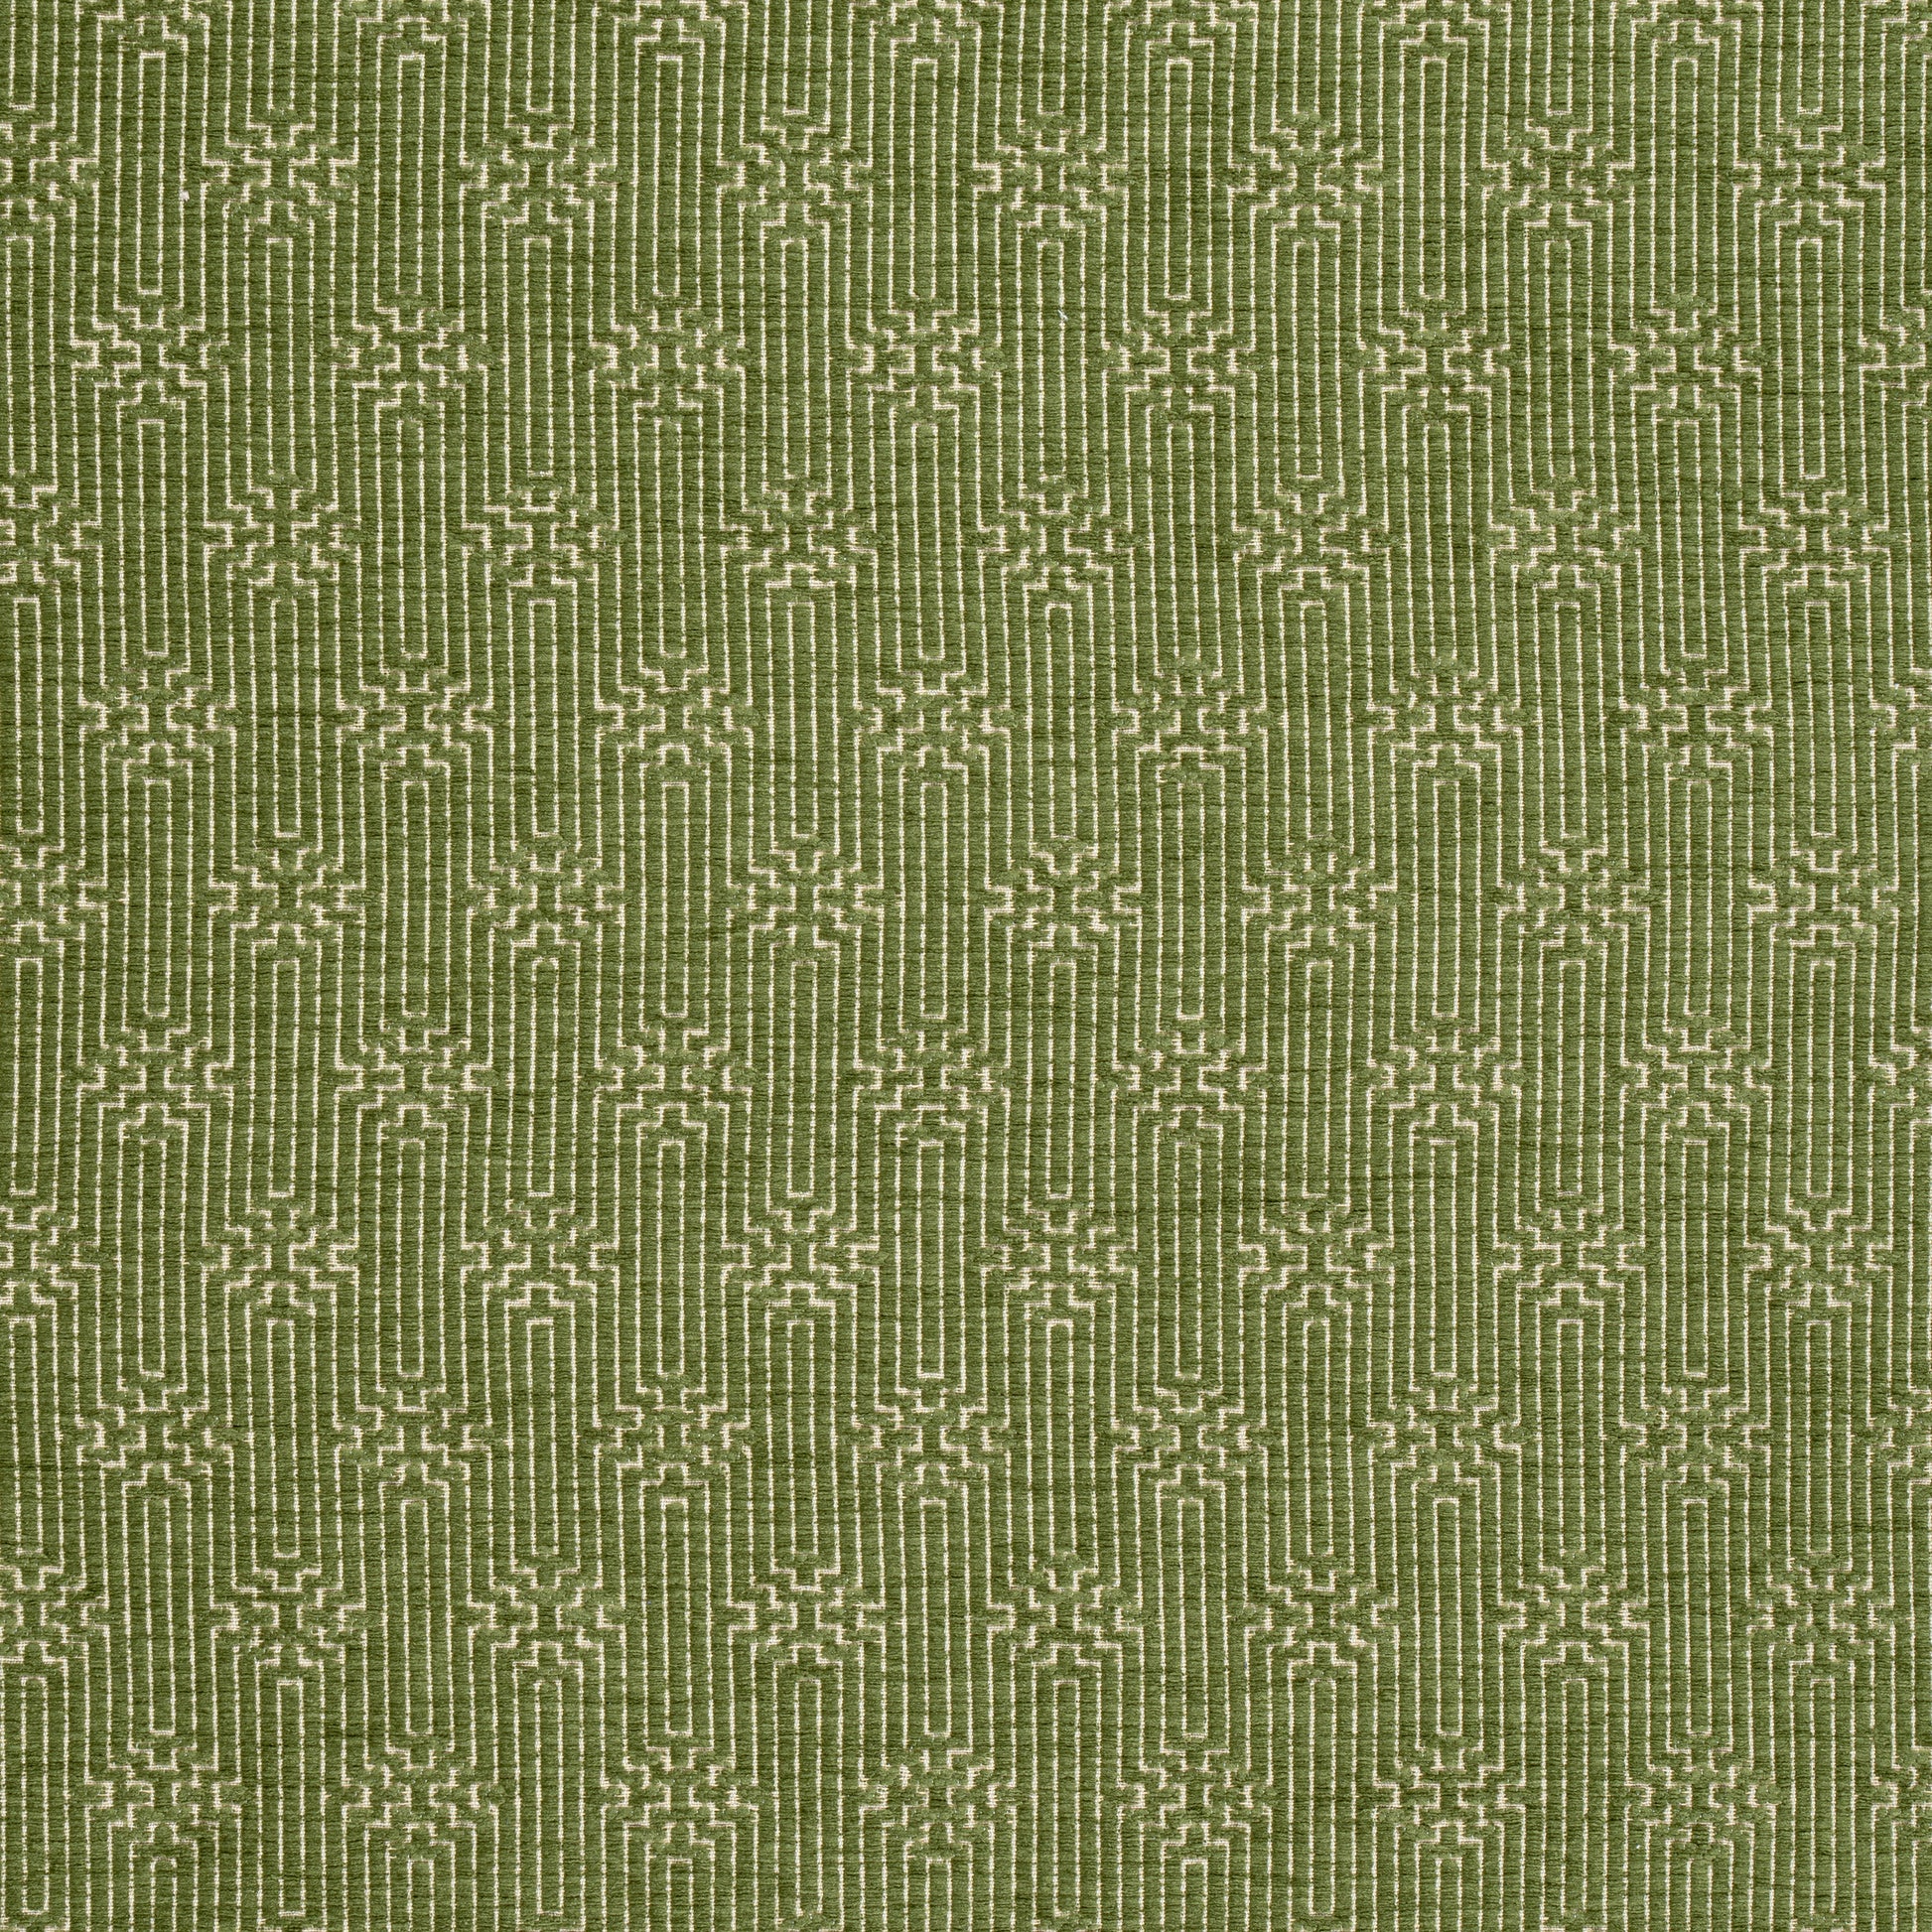 Purchase Thibaut Fabric Item# W74211 pattern name Crete color Olive